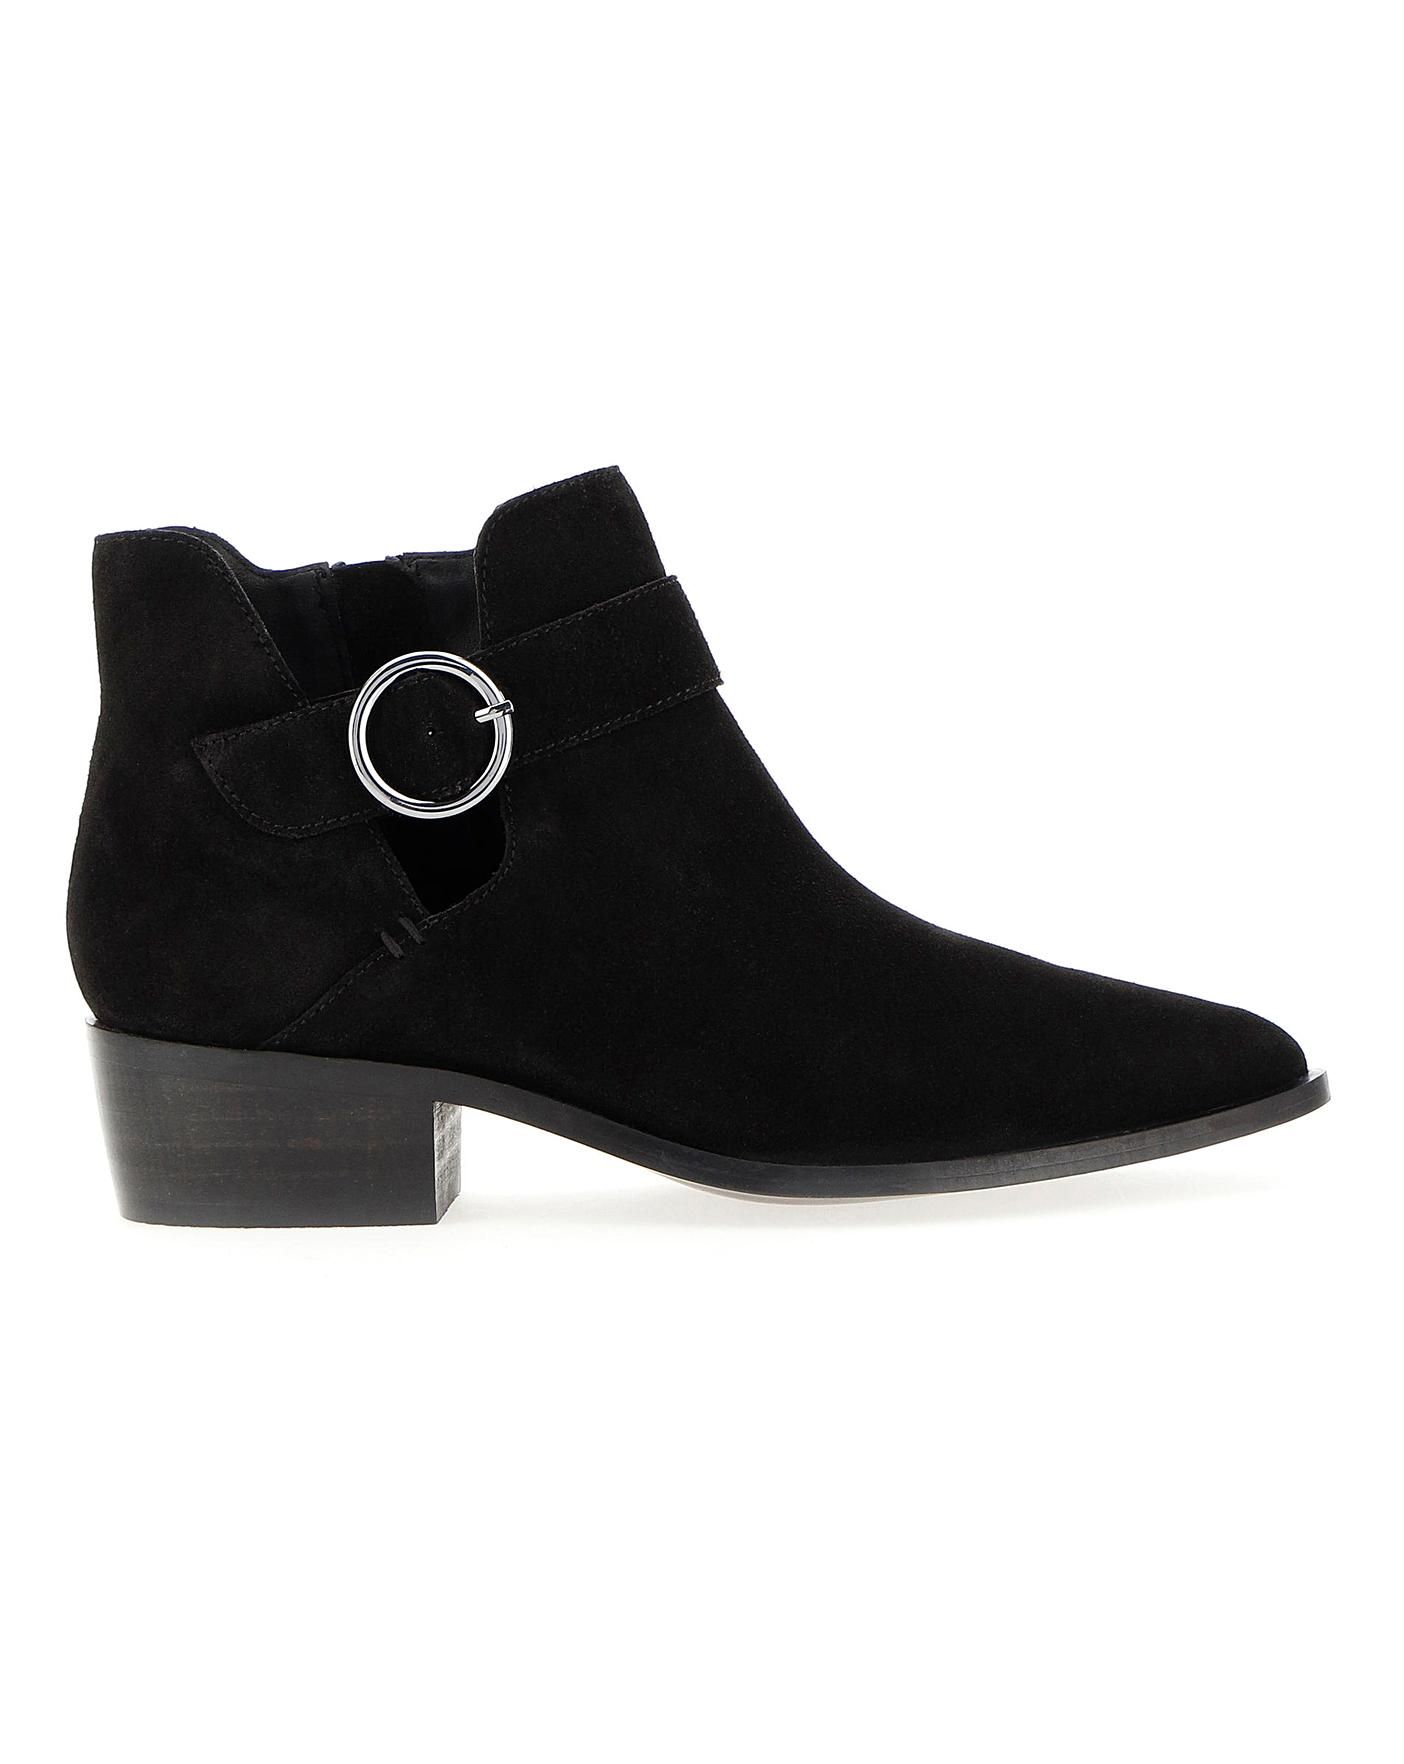 Odette Suede Buckle Detail Boots Extra Wide EEE Fit | Simply Be (UK)